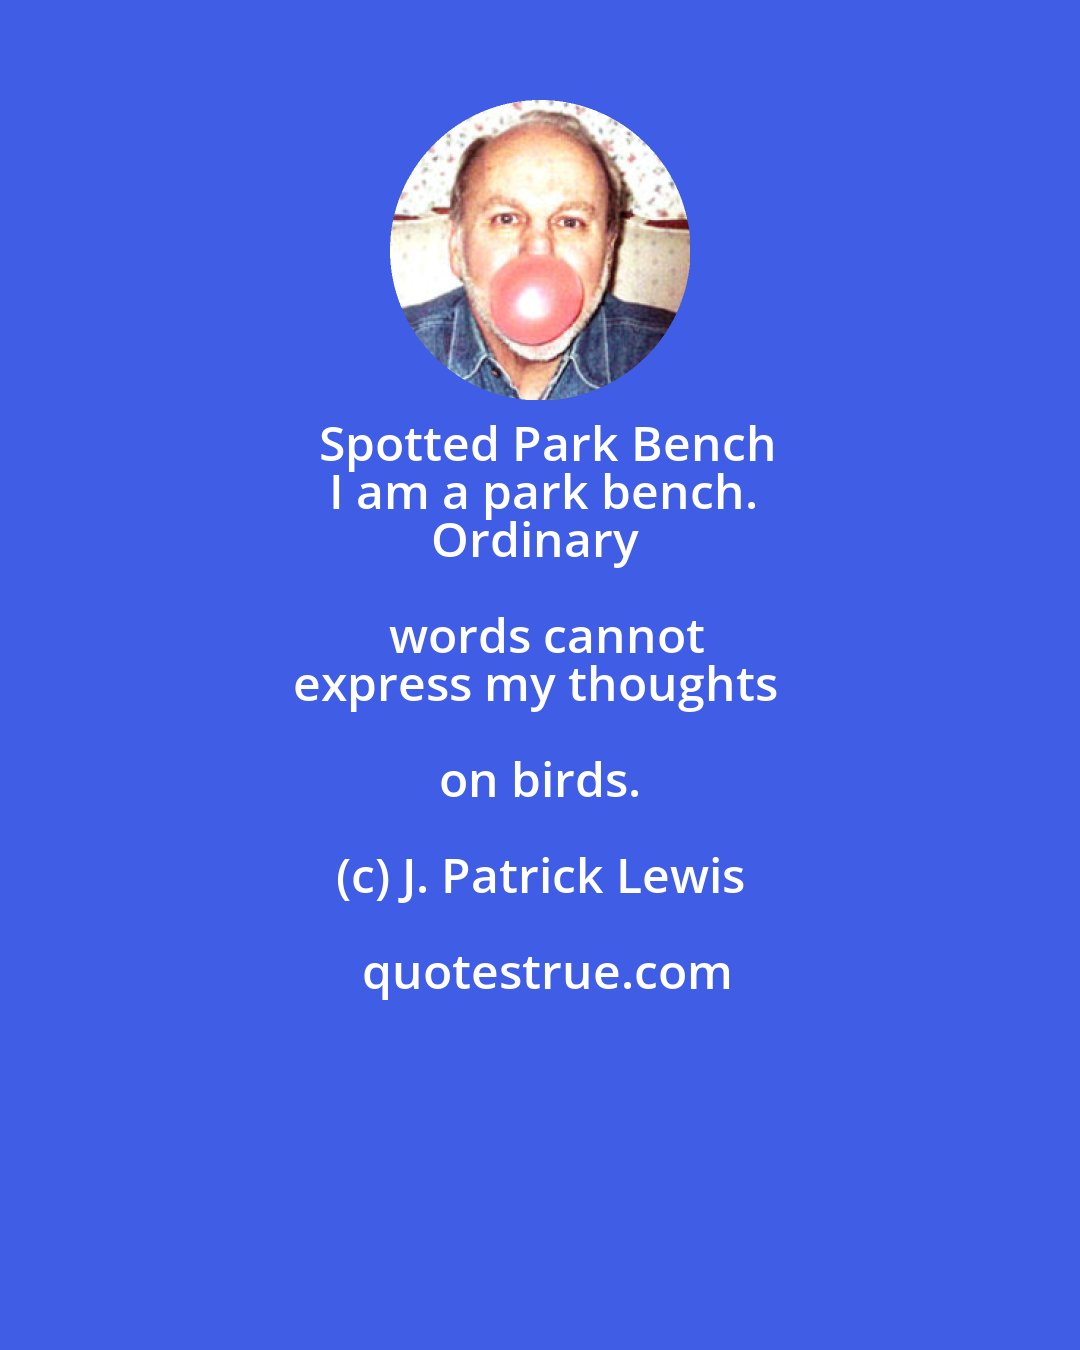 J. Patrick Lewis: Spotted Park Bench
I am a park bench.
Ordinary words cannot
express my thoughts on birds.